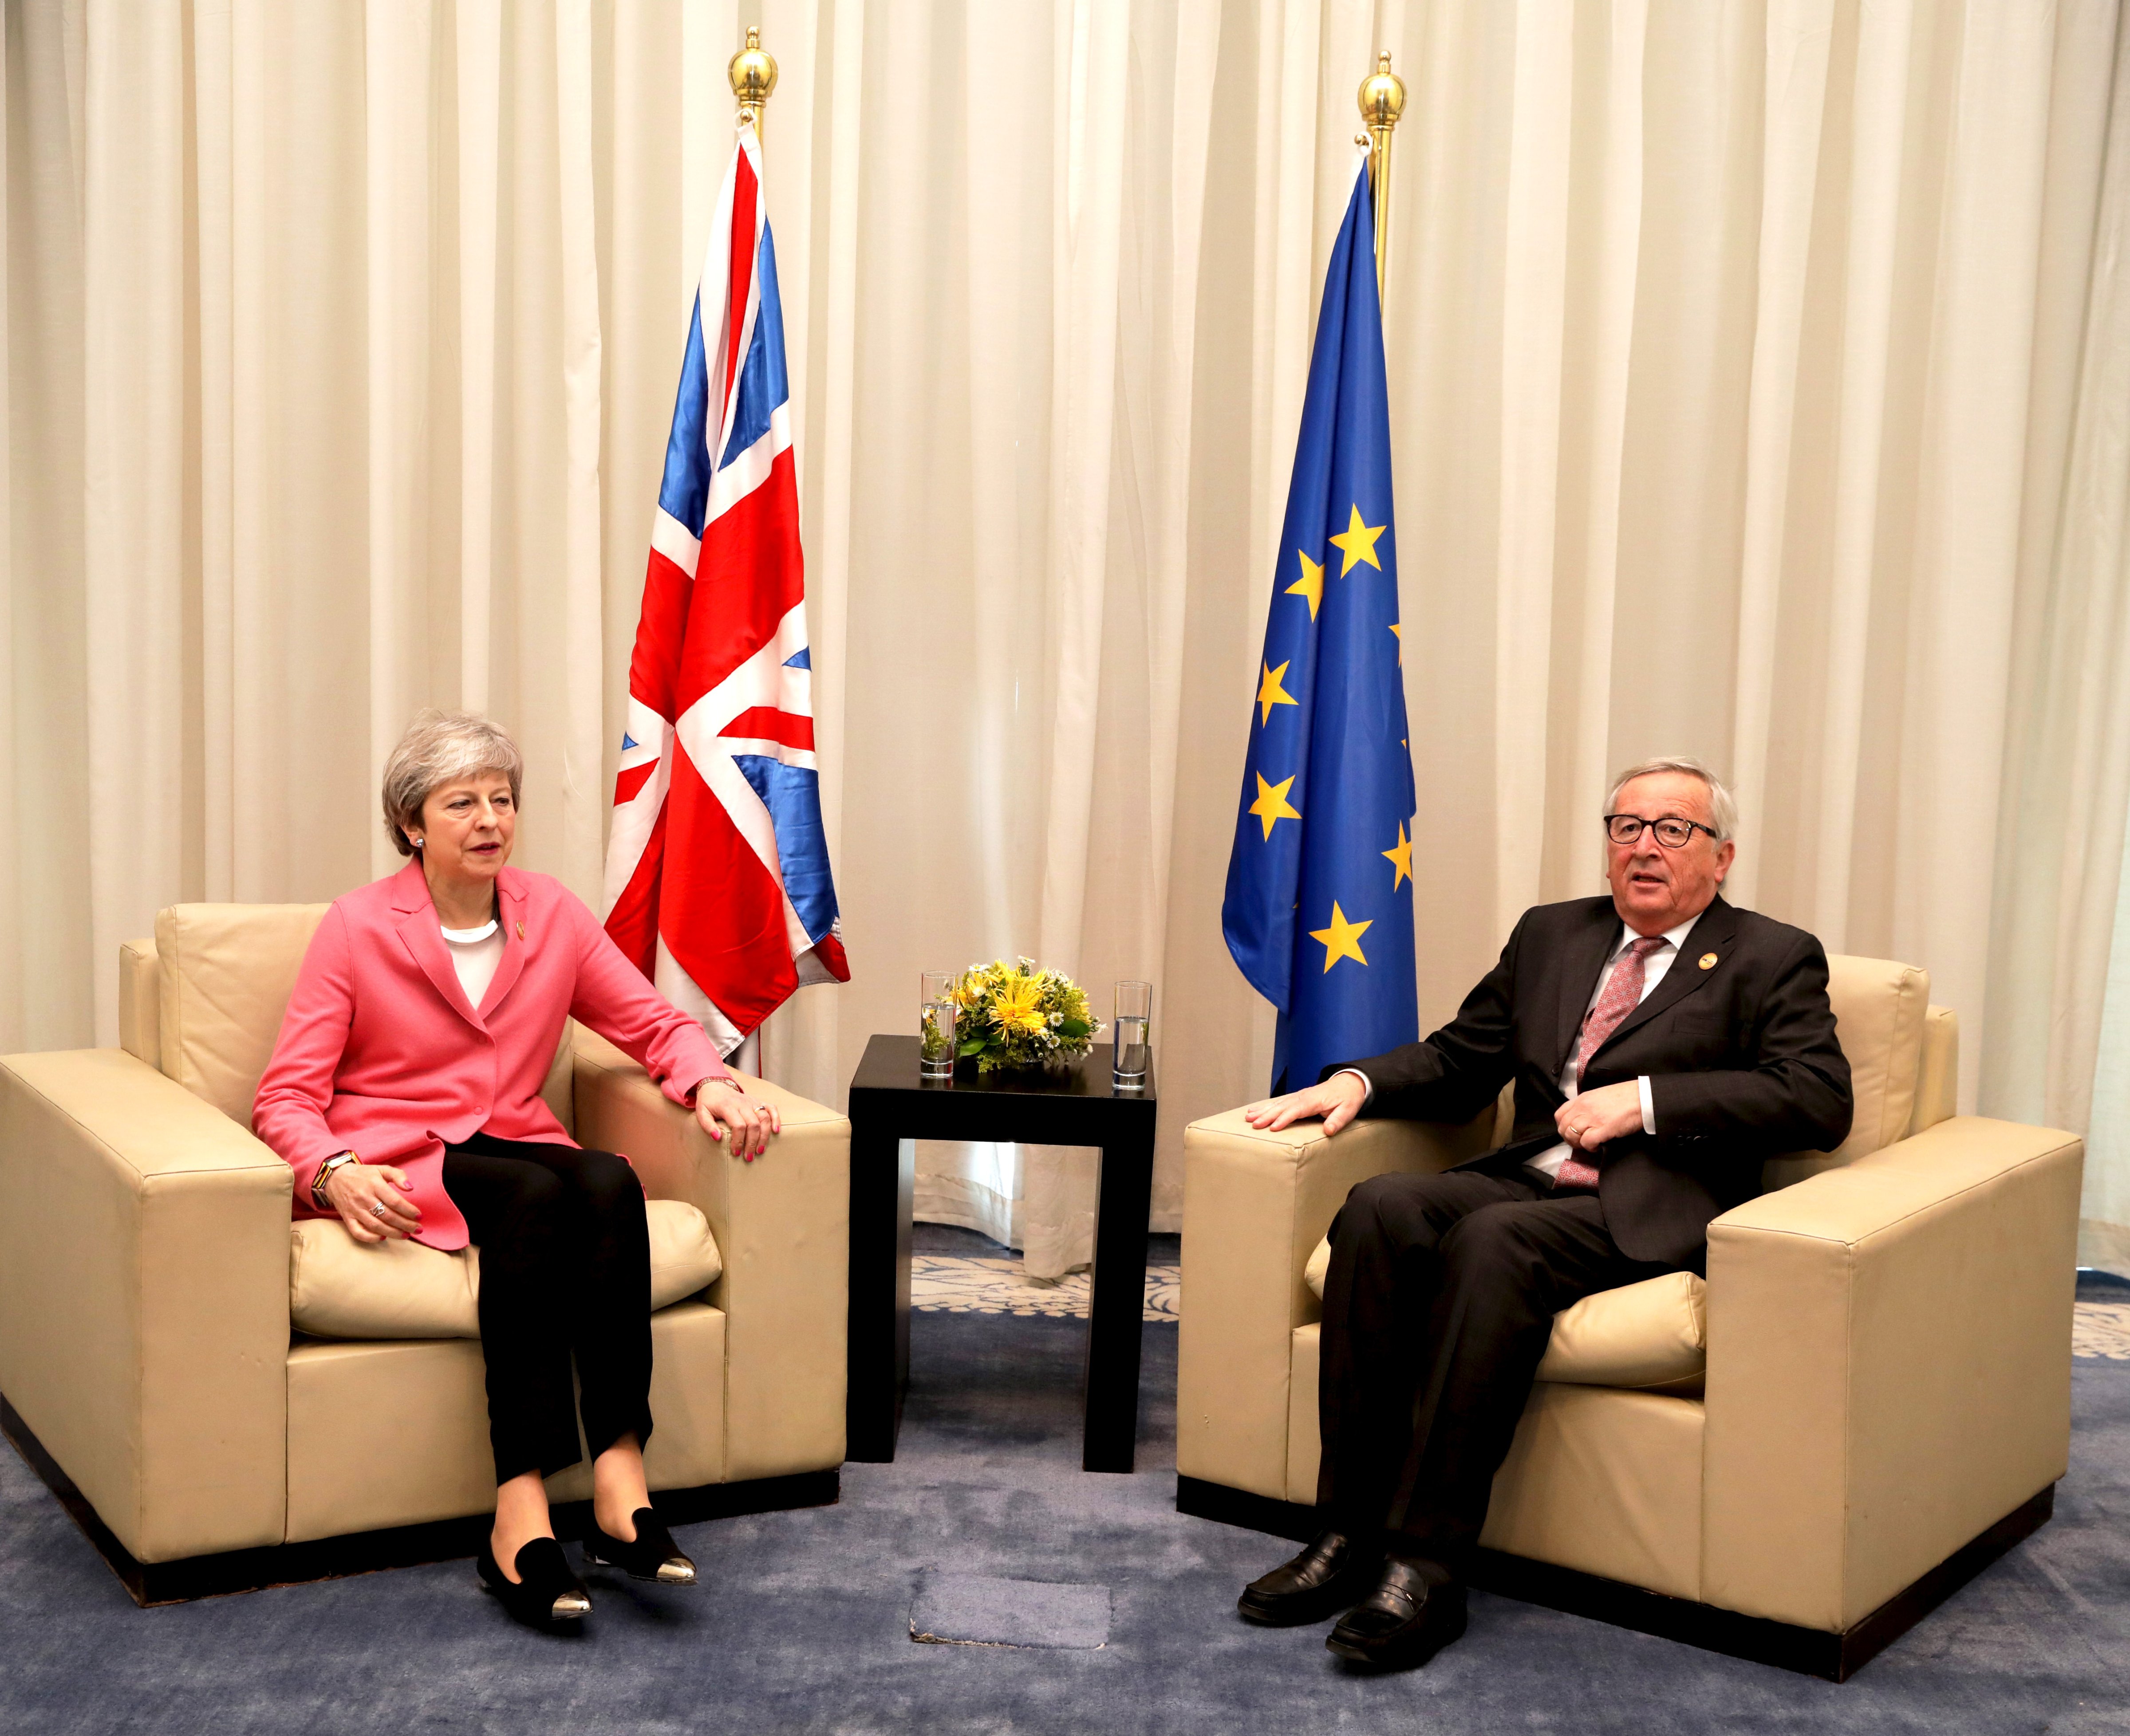 British Prime Minster Theresa May and President of European Commission Jean-Claude Juncker hold bilateral talks during the first Arab-European Summit in Sharm El Sheikh, Egypt on Feb. 25, 2019. (Dan Kitwood&mdash;Getty Images)